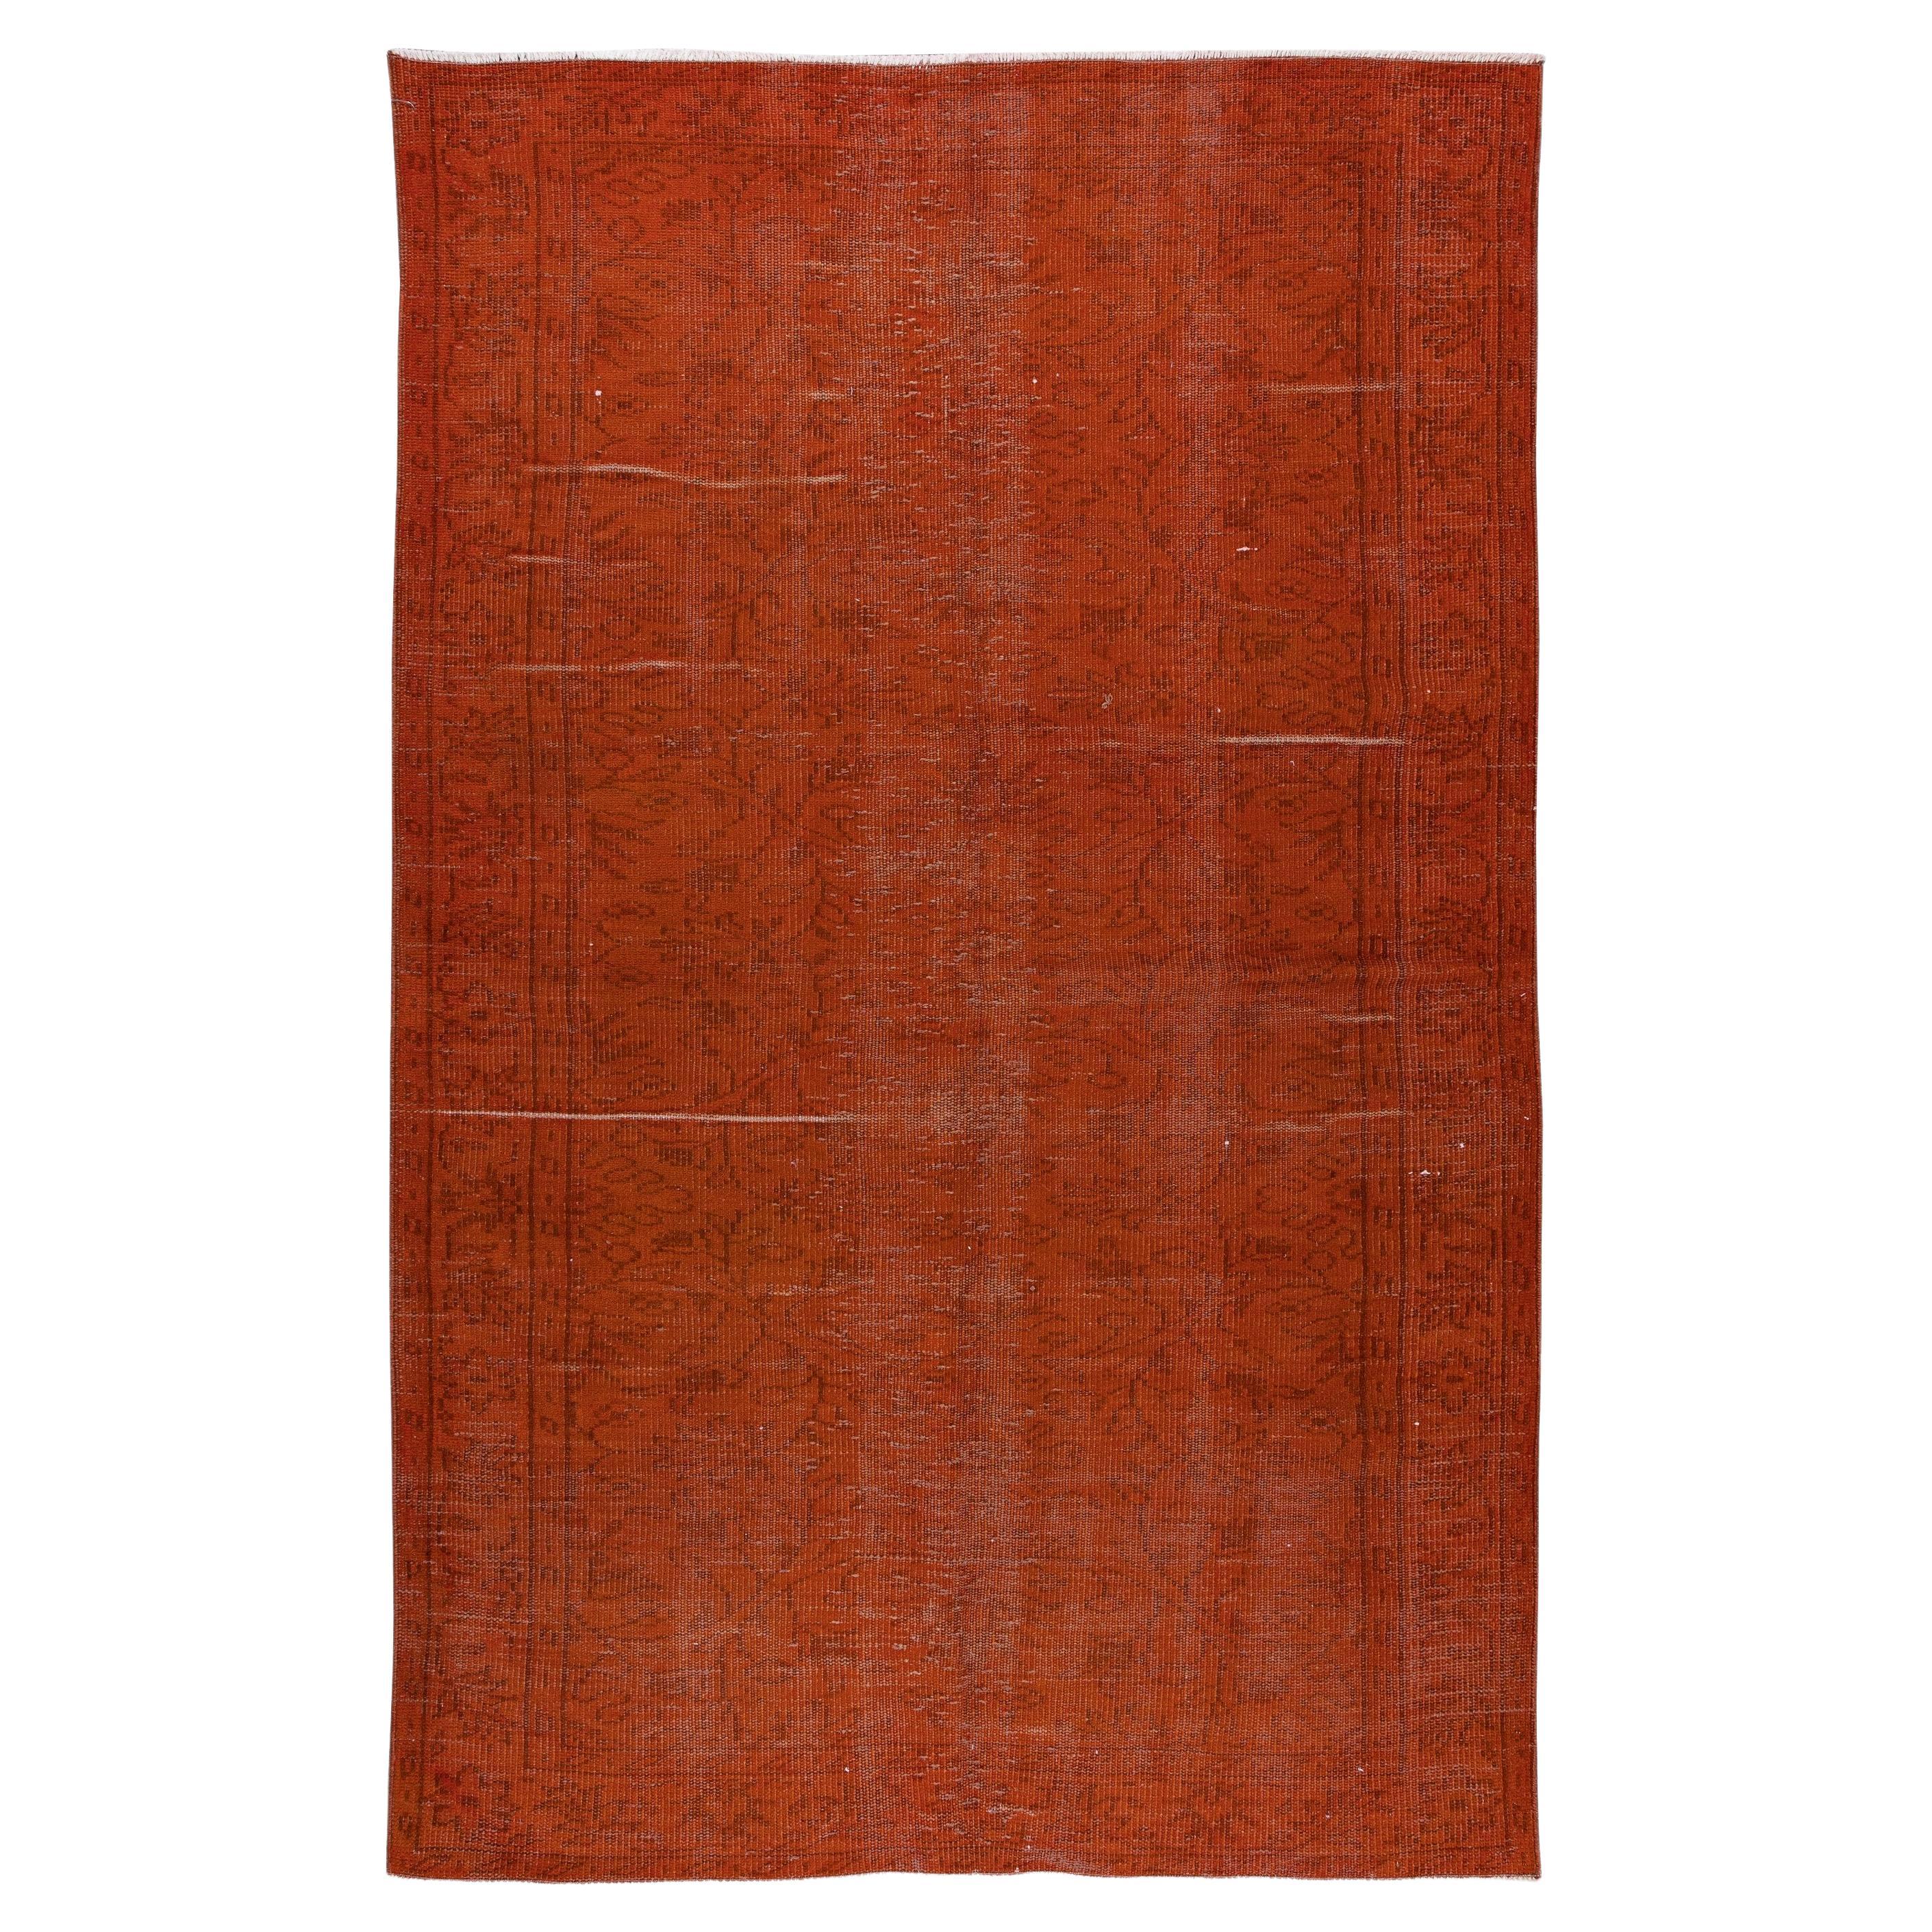 5.2x8.2 Ft Hand Knotted Turkish Rug Over-Dyed in Orange Contemporary Interiors For Sale